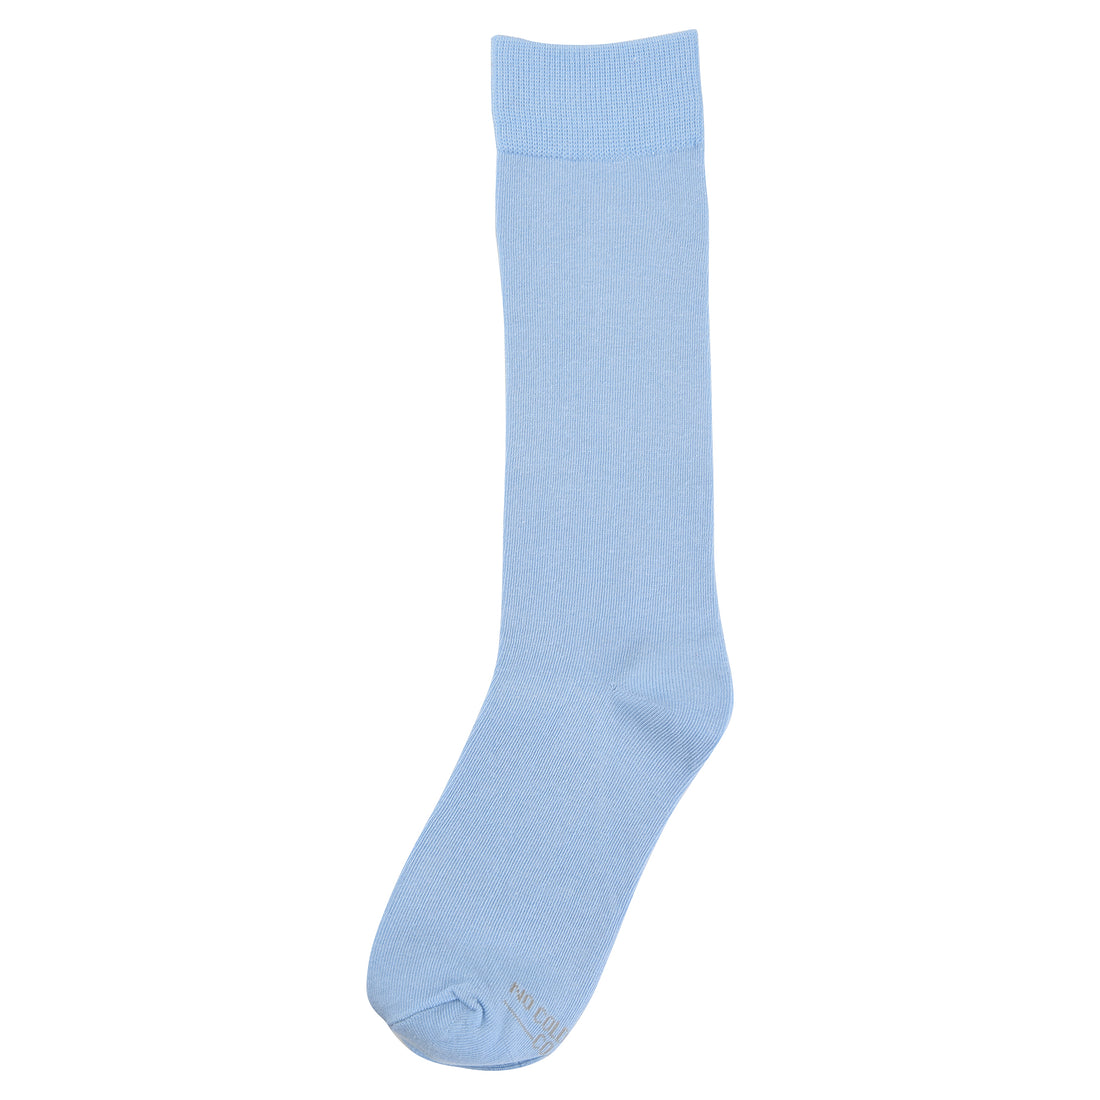 Blue Socks: A Complete Buyer’s Guide | No Cold Feet